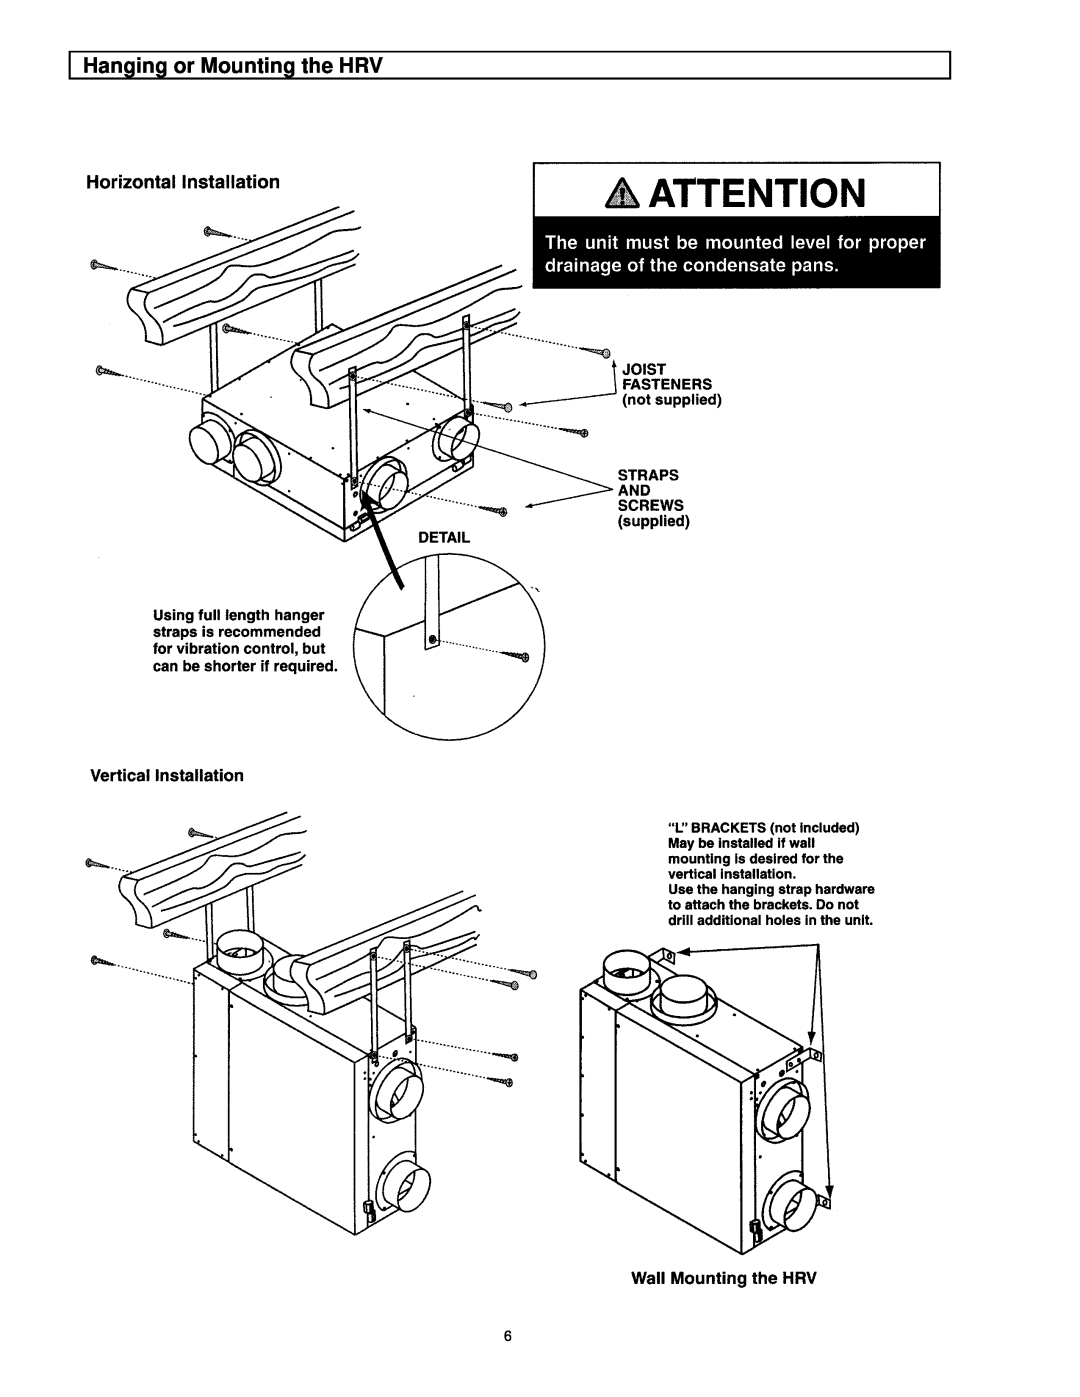 American Aldes HRV 120SRD manual Hanging or Mounting the HRV 